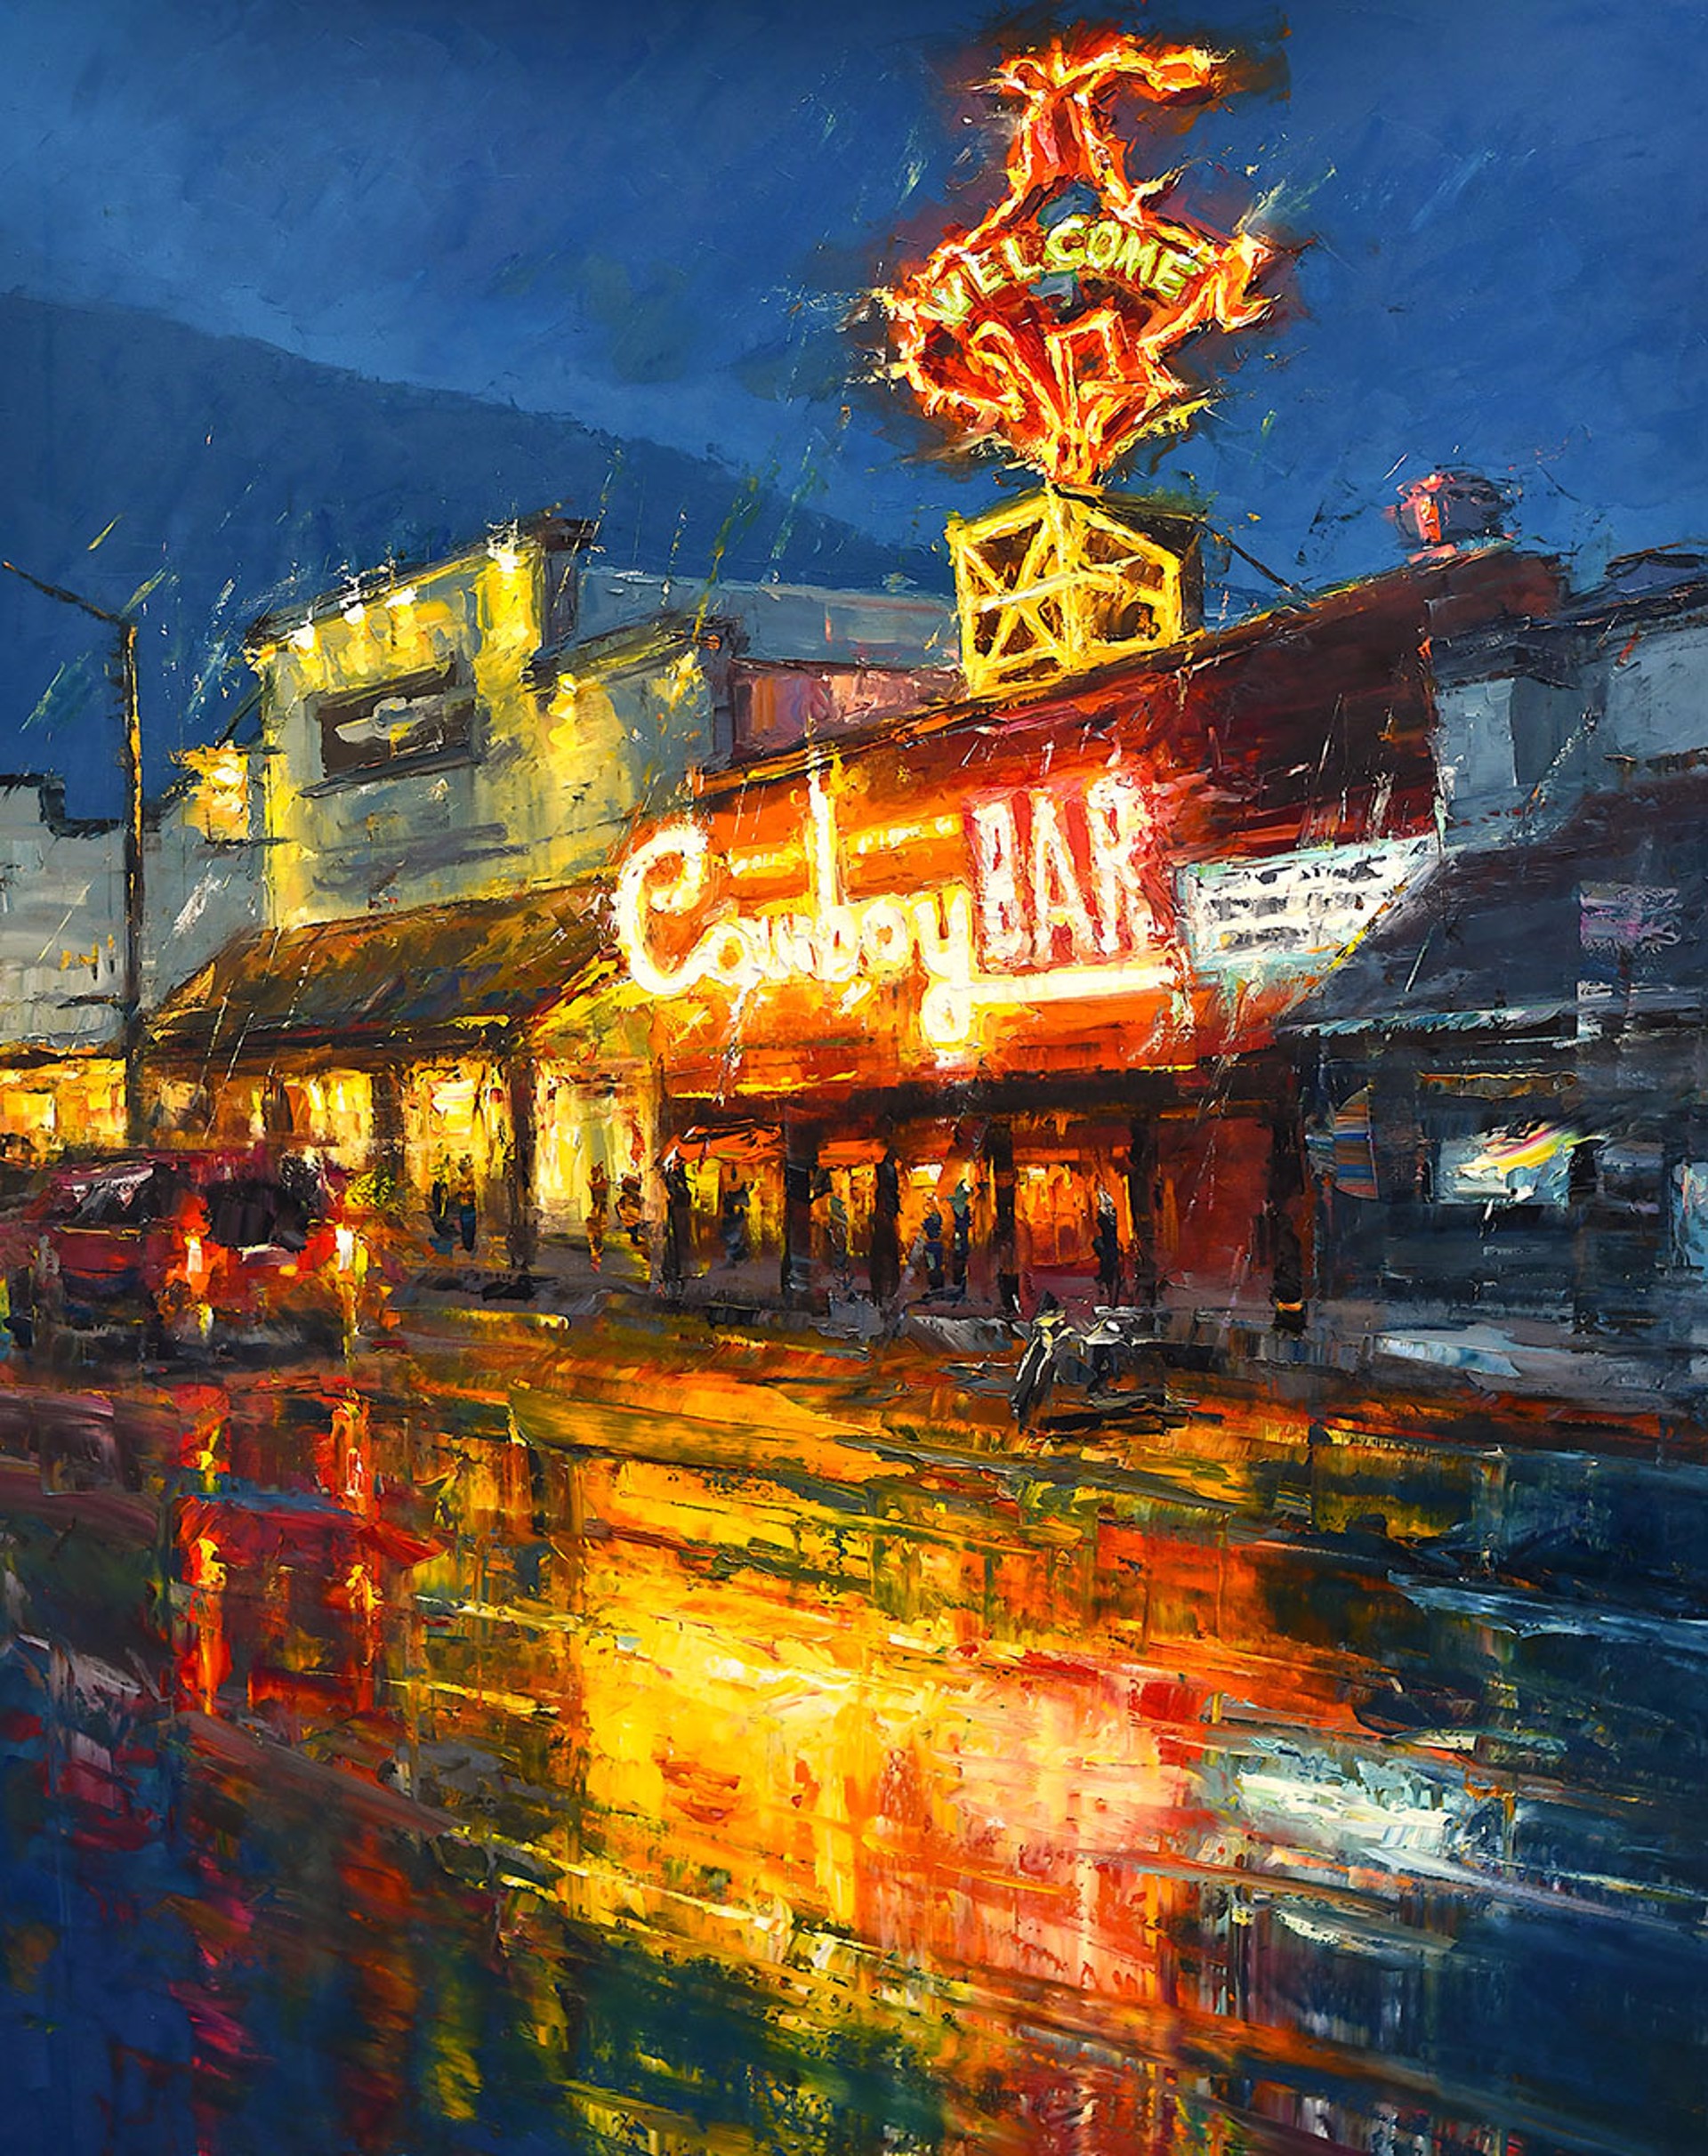 Original Oil Painting By Caleb Meyer Featuring The Million Dollar Cowboy Bar In Jackson Wyoming In The Rain